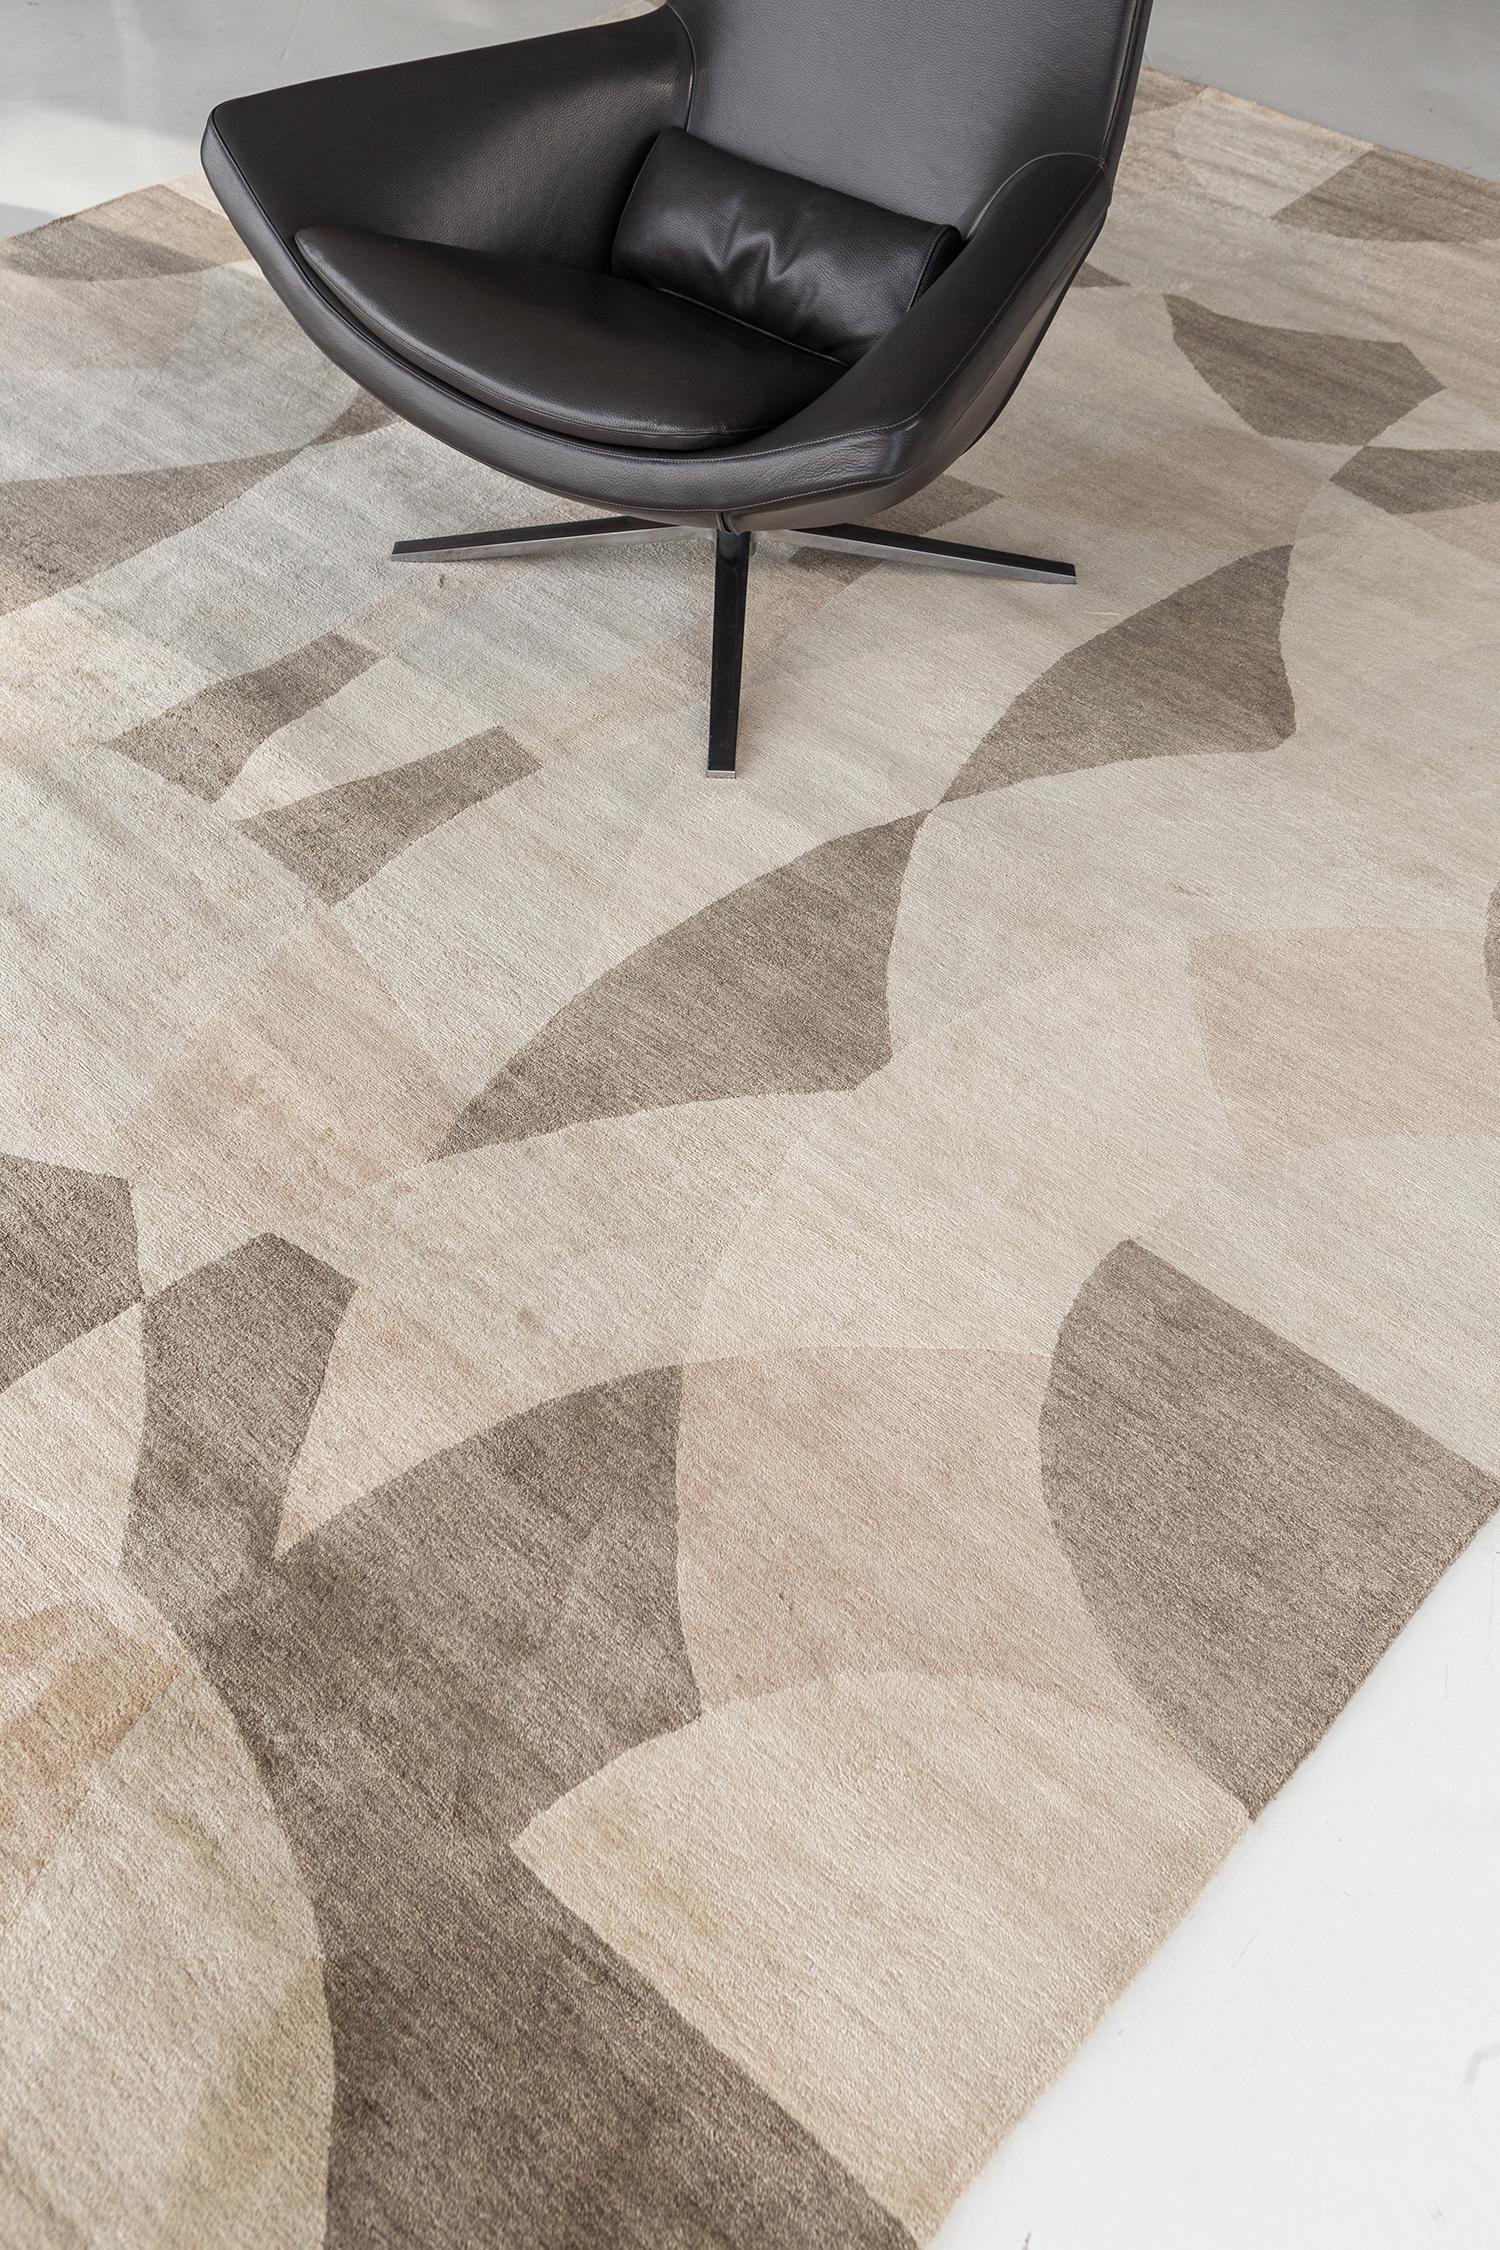 Fantasia is a kaleidoscopic imagining of the interior of di Cambio’s Duomo in Firenze. Sumptuously realized in 100% silk construction. The scaled and earth-colored tone will make a magnificent backdrop for showcasing everything in the room that you